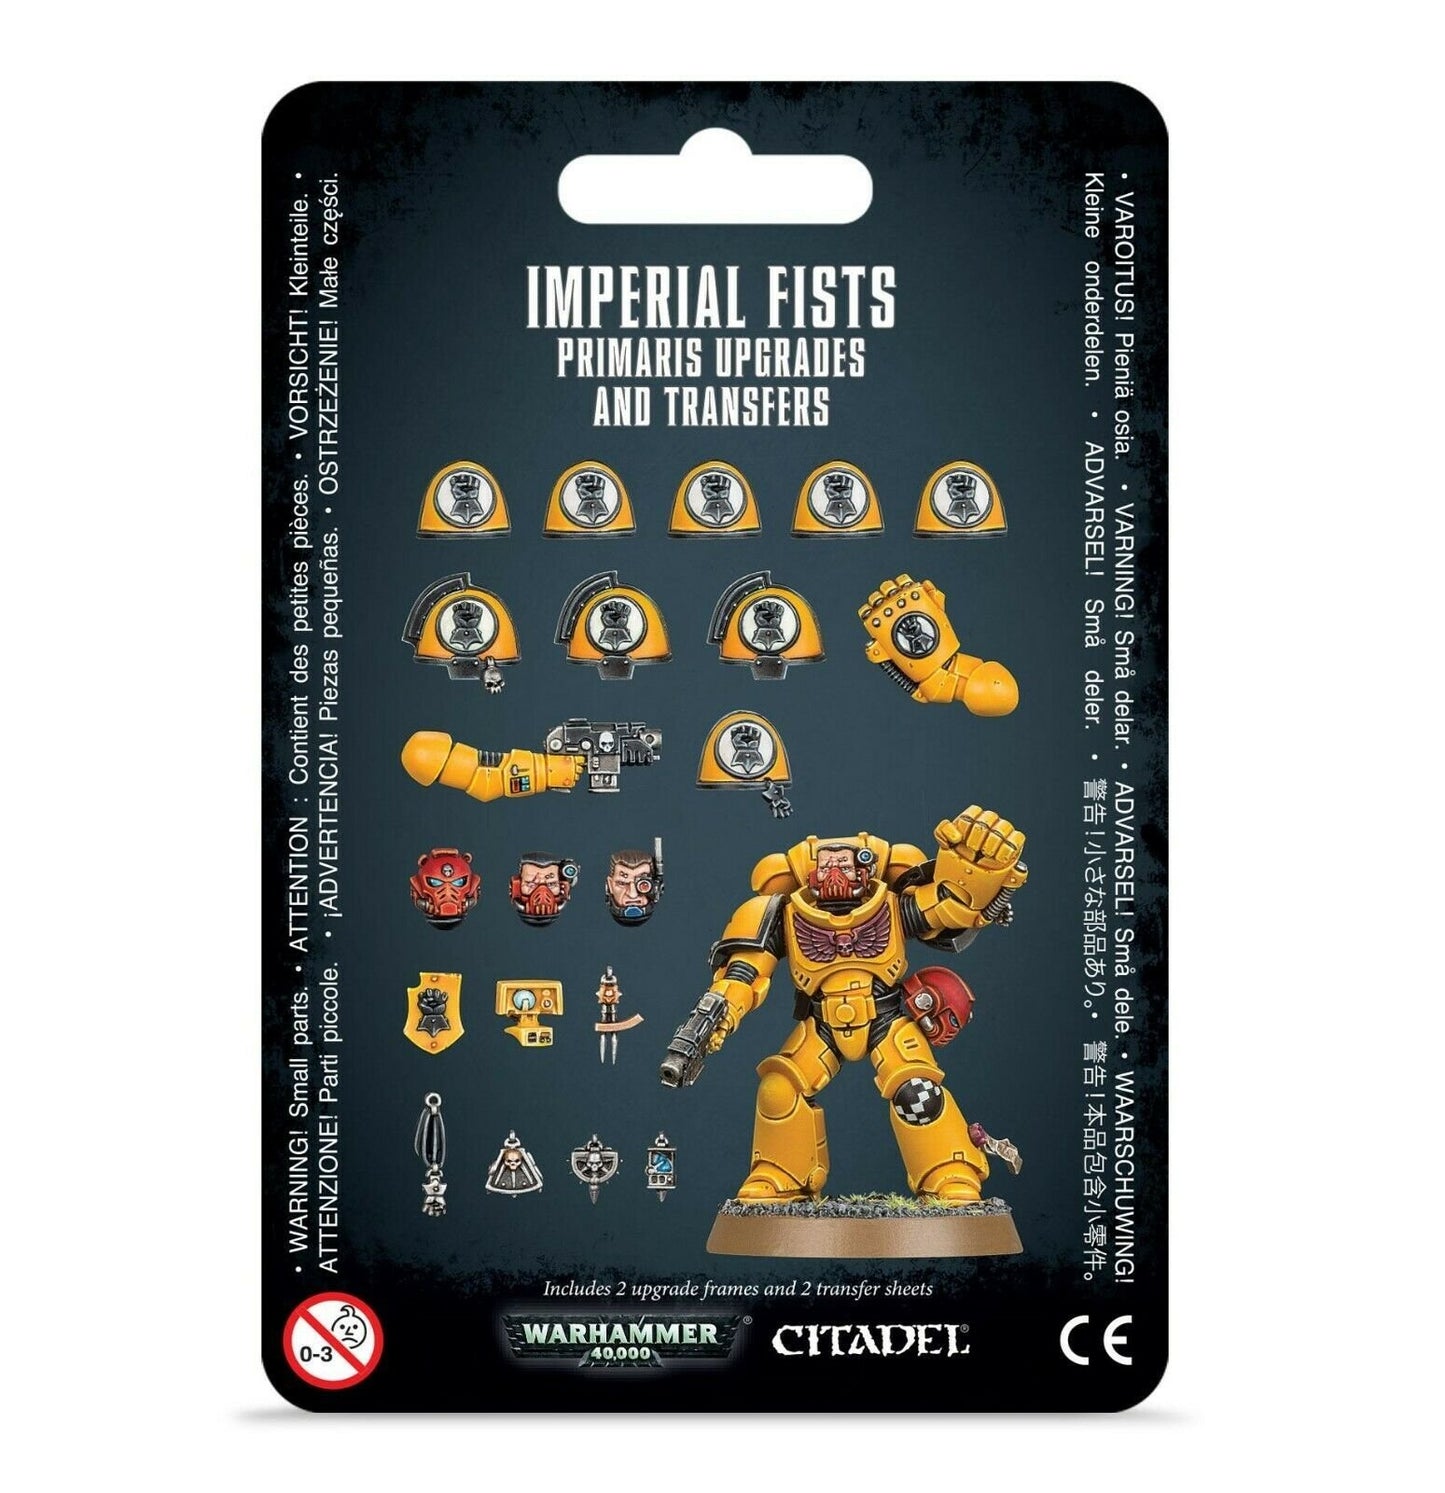 Discount Imperial Fists Primaris Upgrades and Transfers - West Coast Games